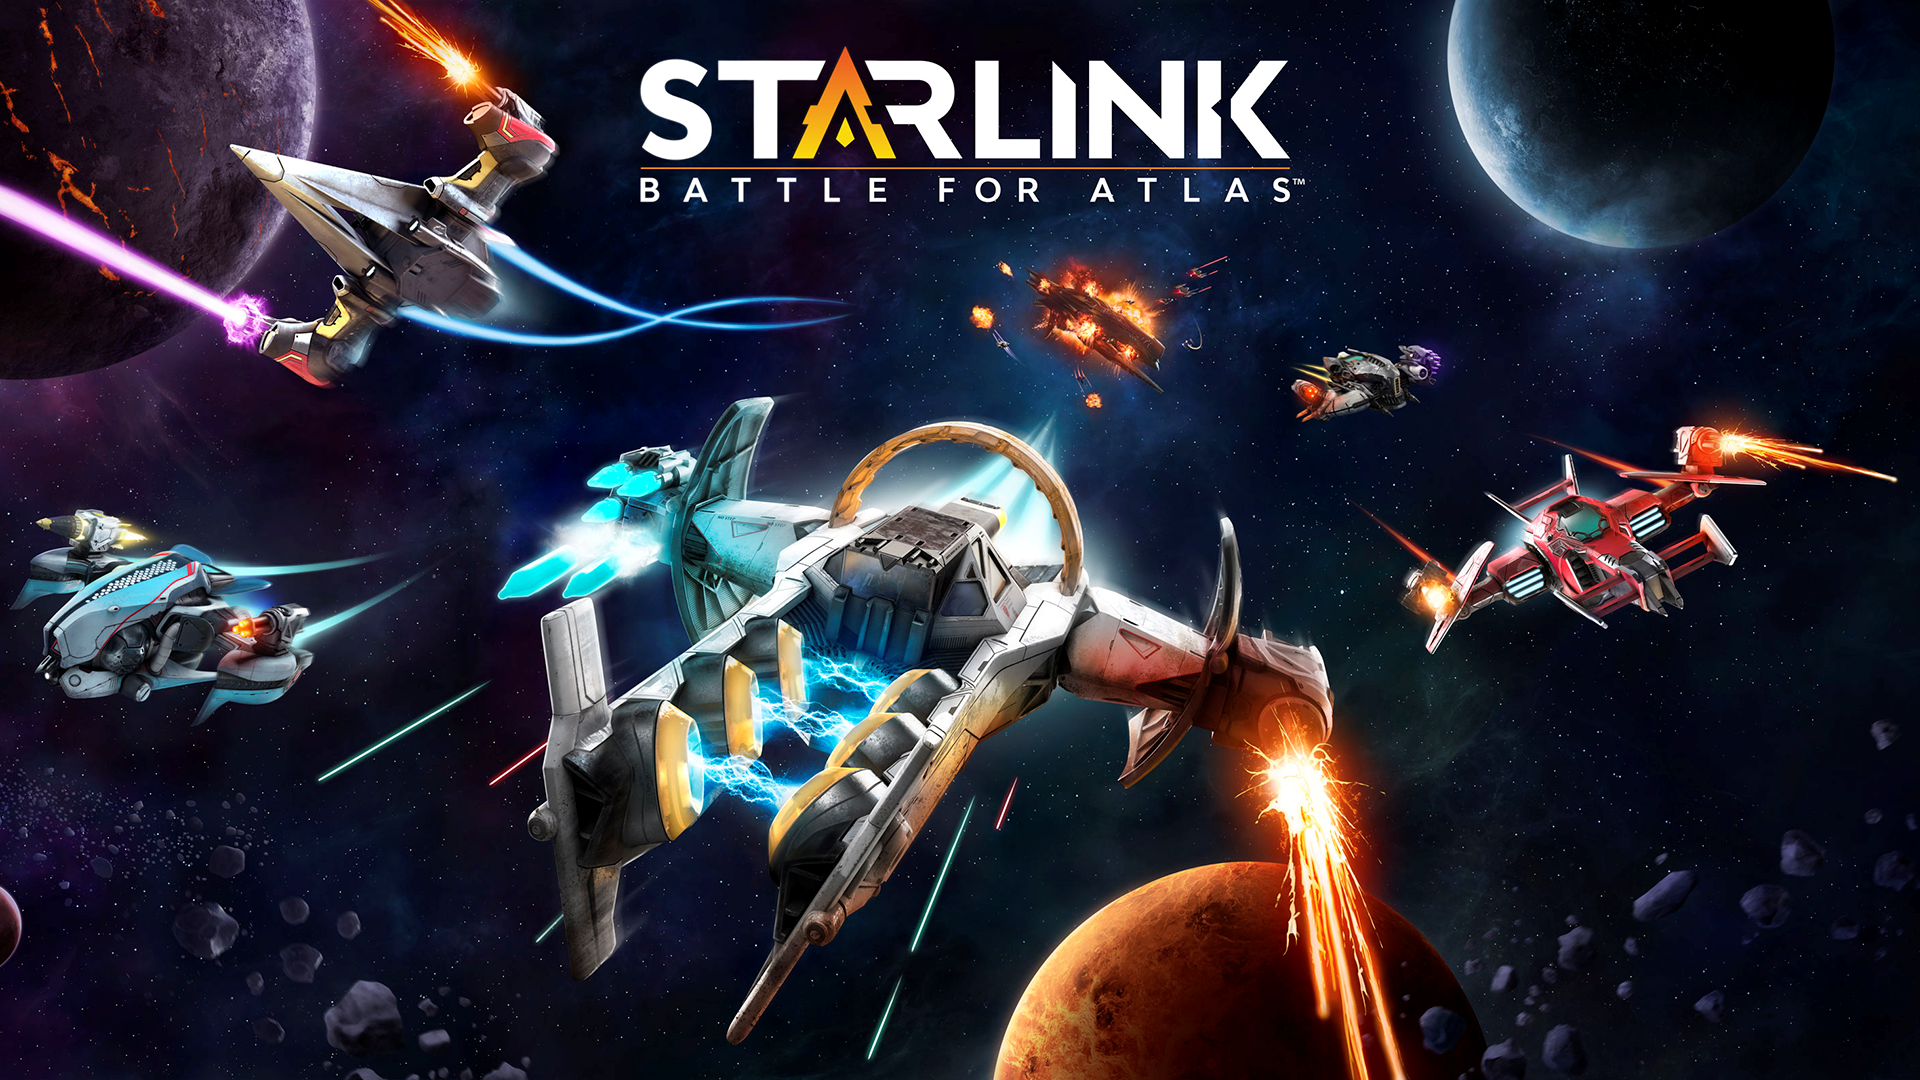 10. Extend Starlink's range to bring the fight to Grax. 